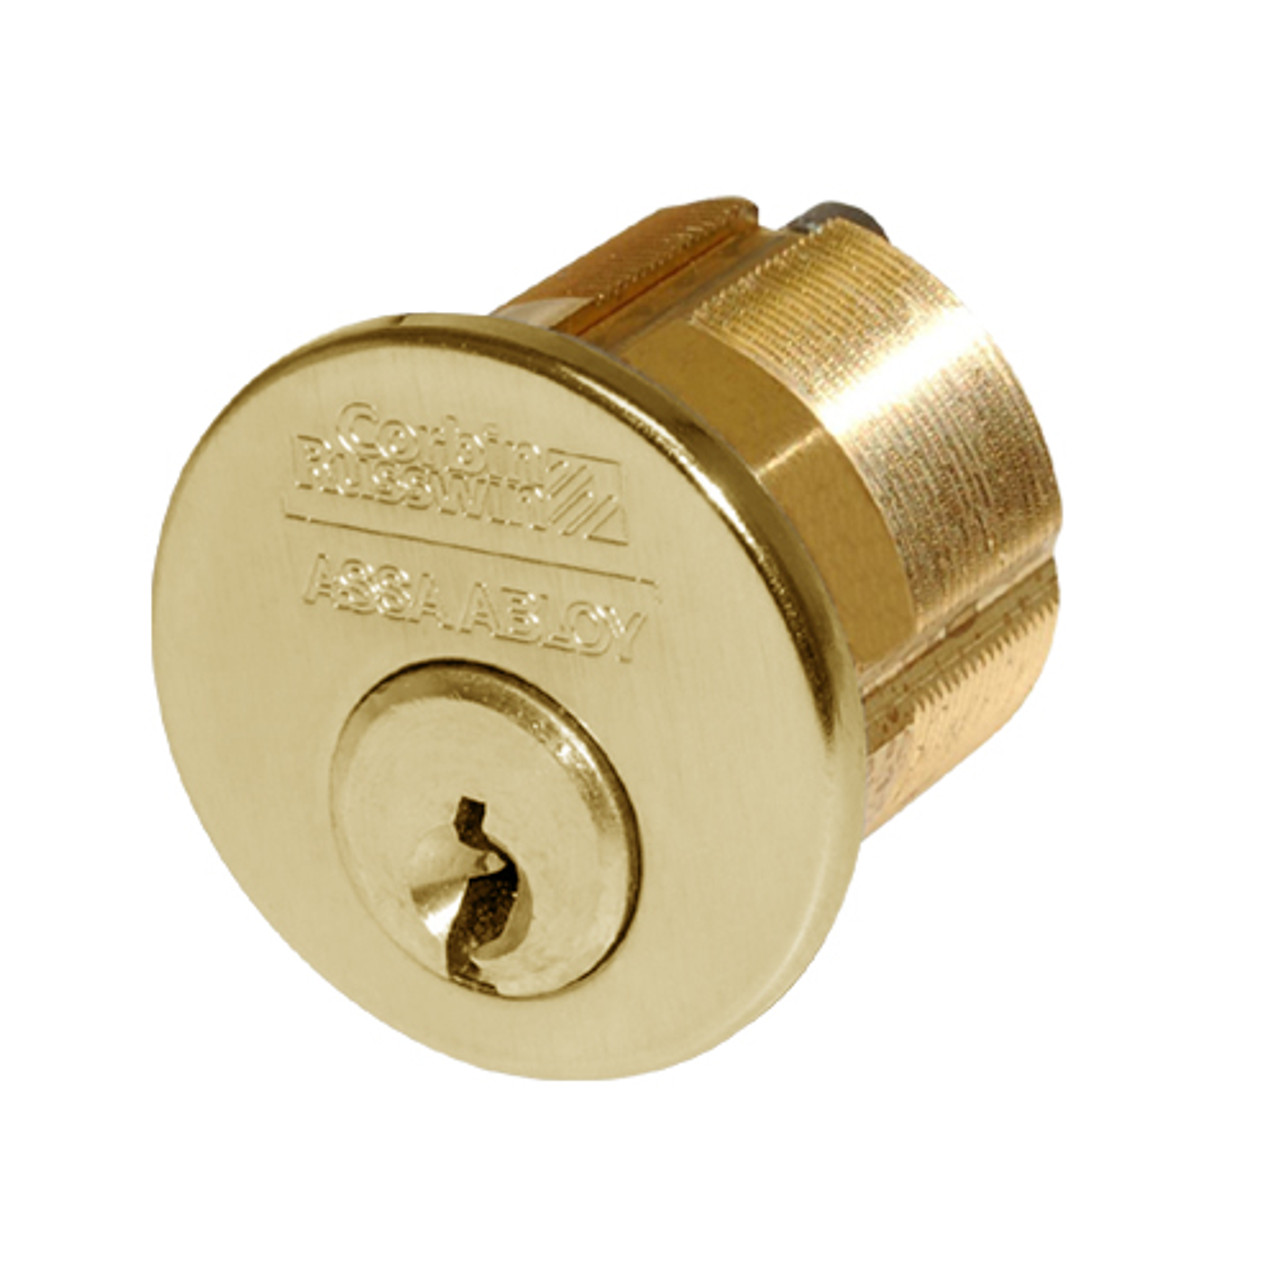 CR1000-118-A02-6-59D1-605 Corbin Conventional Mortise Cylinder for Mortise Lock and DL3000 Deadlocks with Straight Cam in Bright Brass Finish